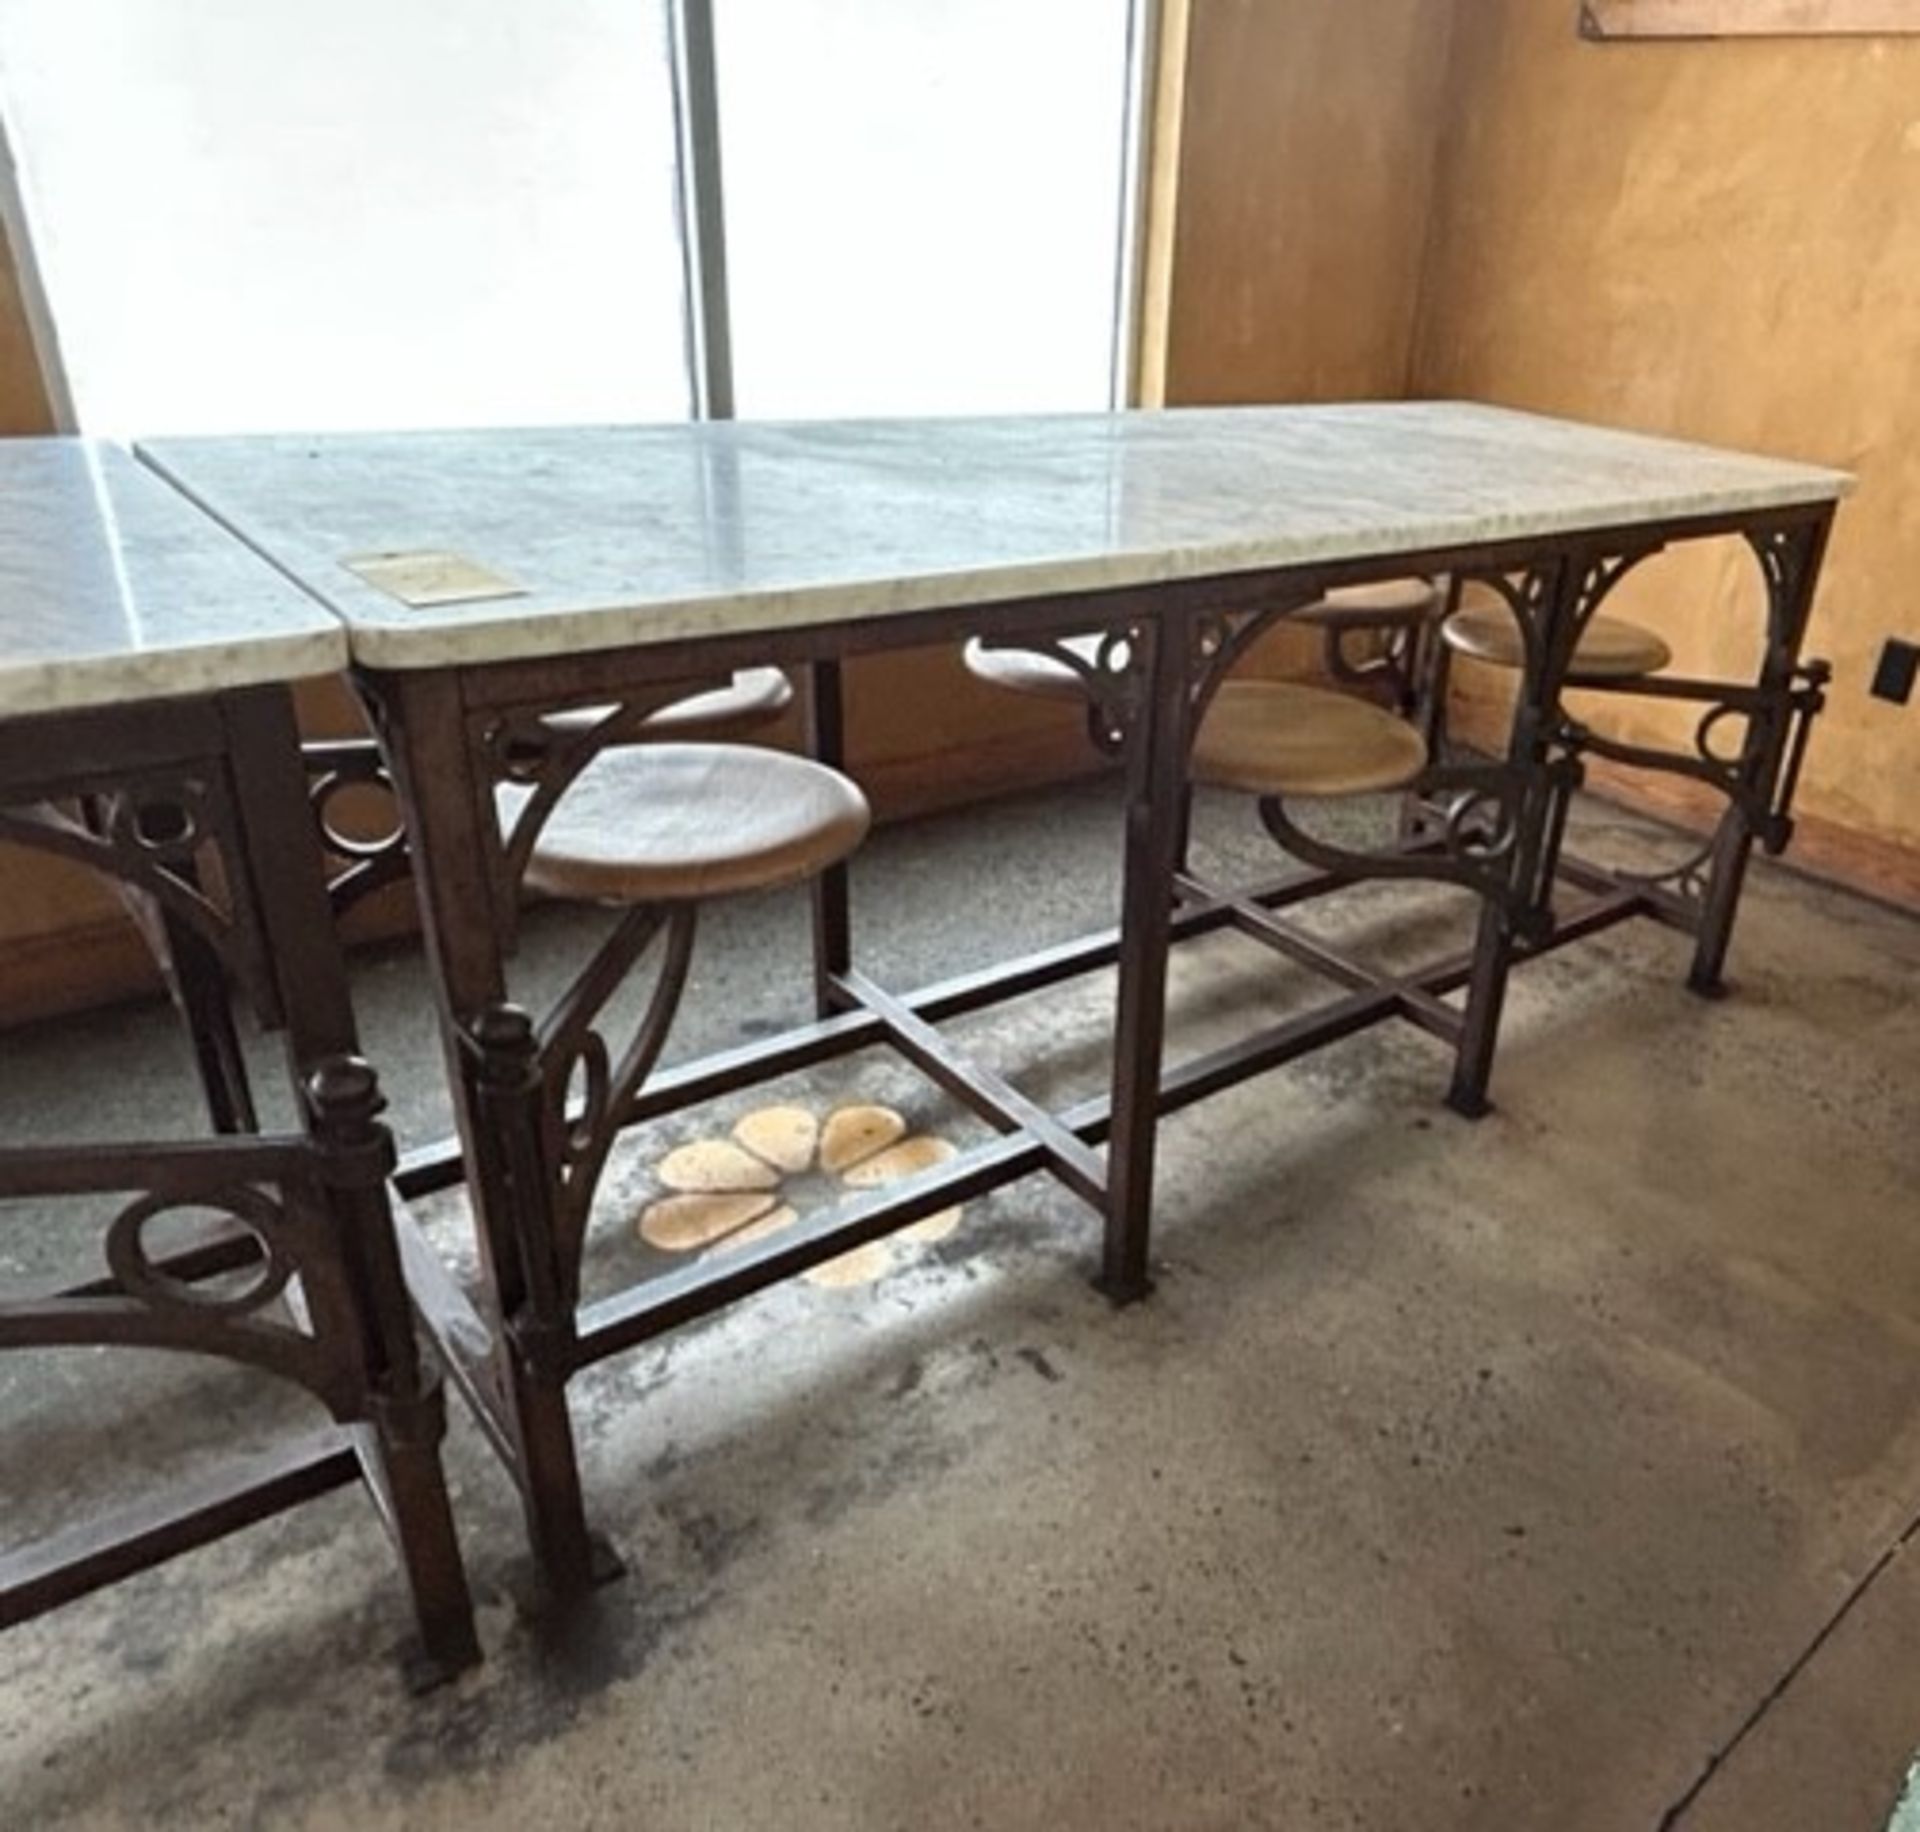 6-Seat Table, Metal Frame, Marble Top, 6-Swing Out Chairs, 32" x 83" x 36" - Image 2 of 4